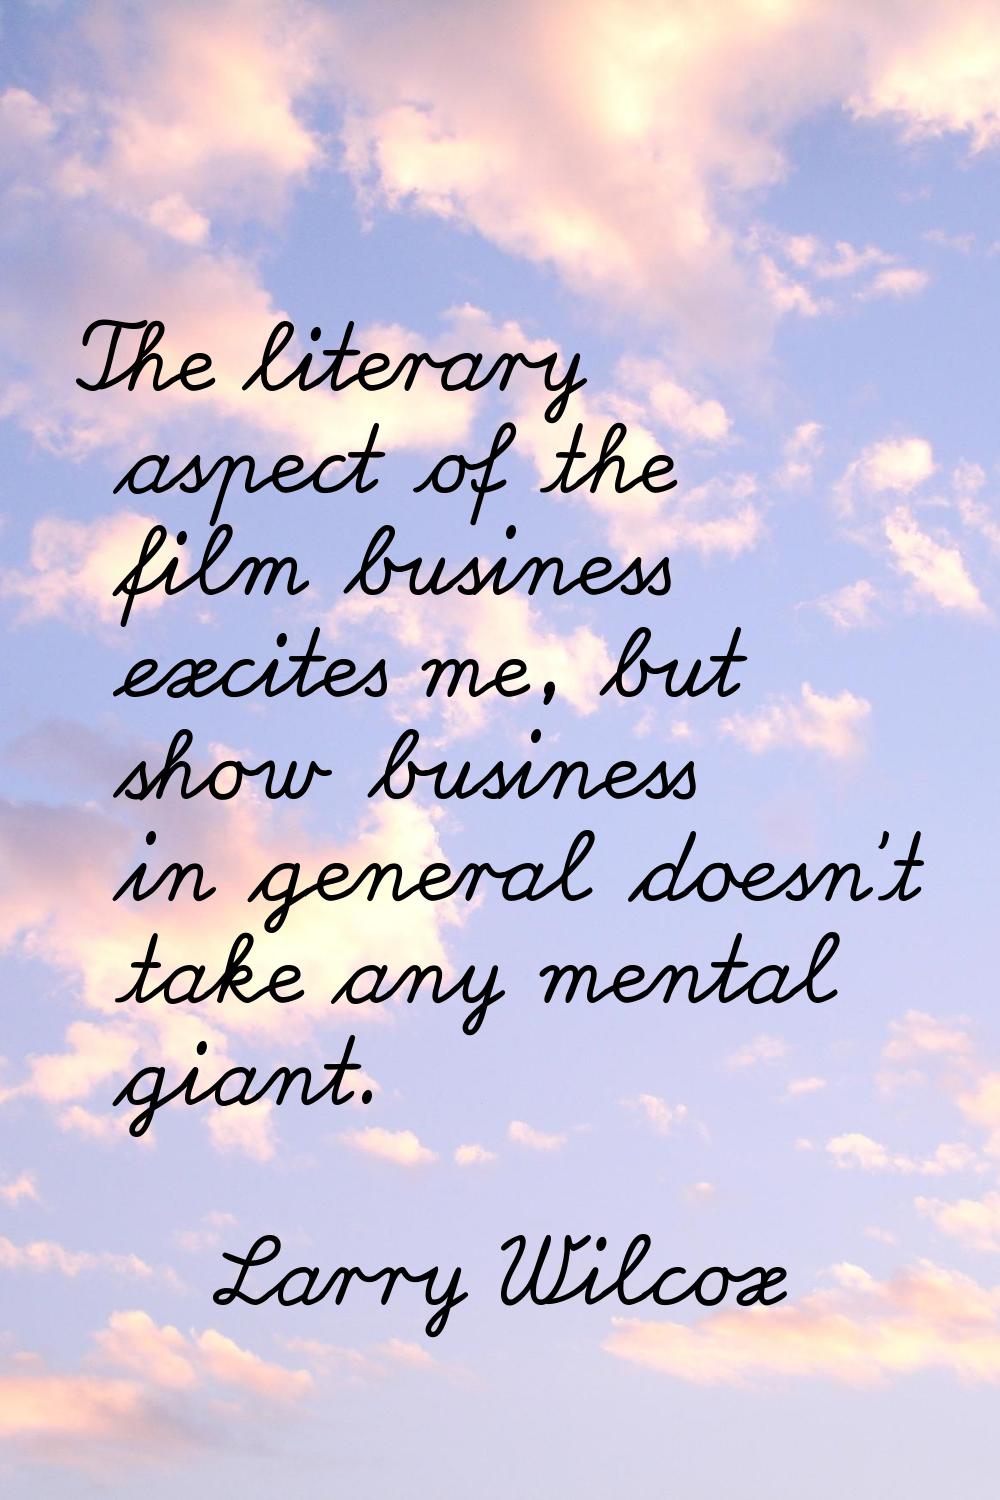 The literary aspect of the film business excites me, but show business in general doesn't take any 